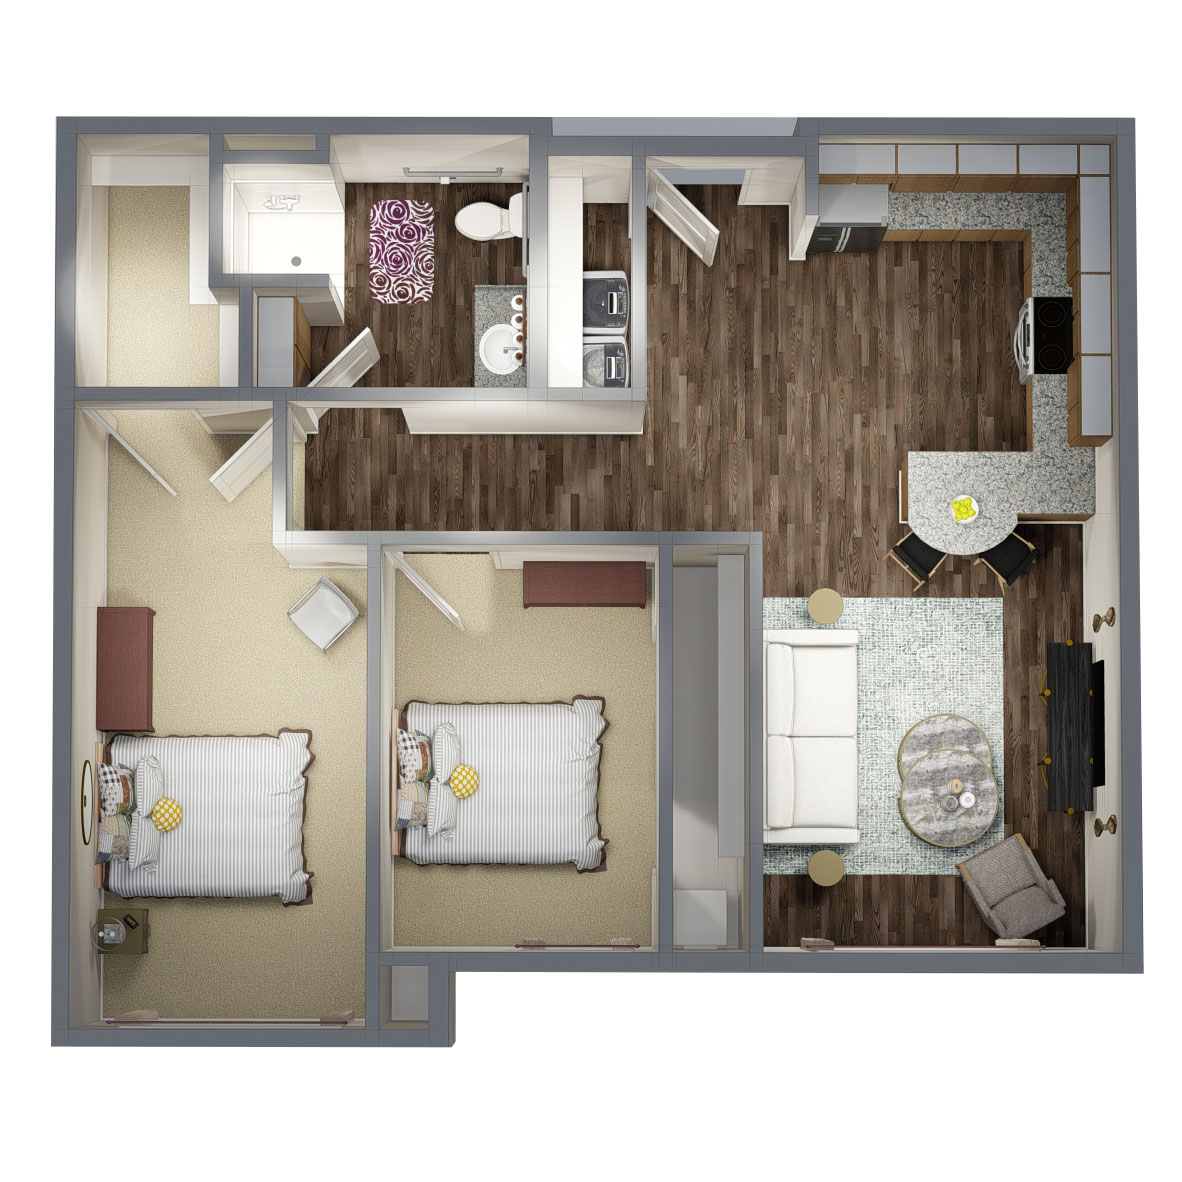 The Residence at Wolfforth - Floorplan - 2BR